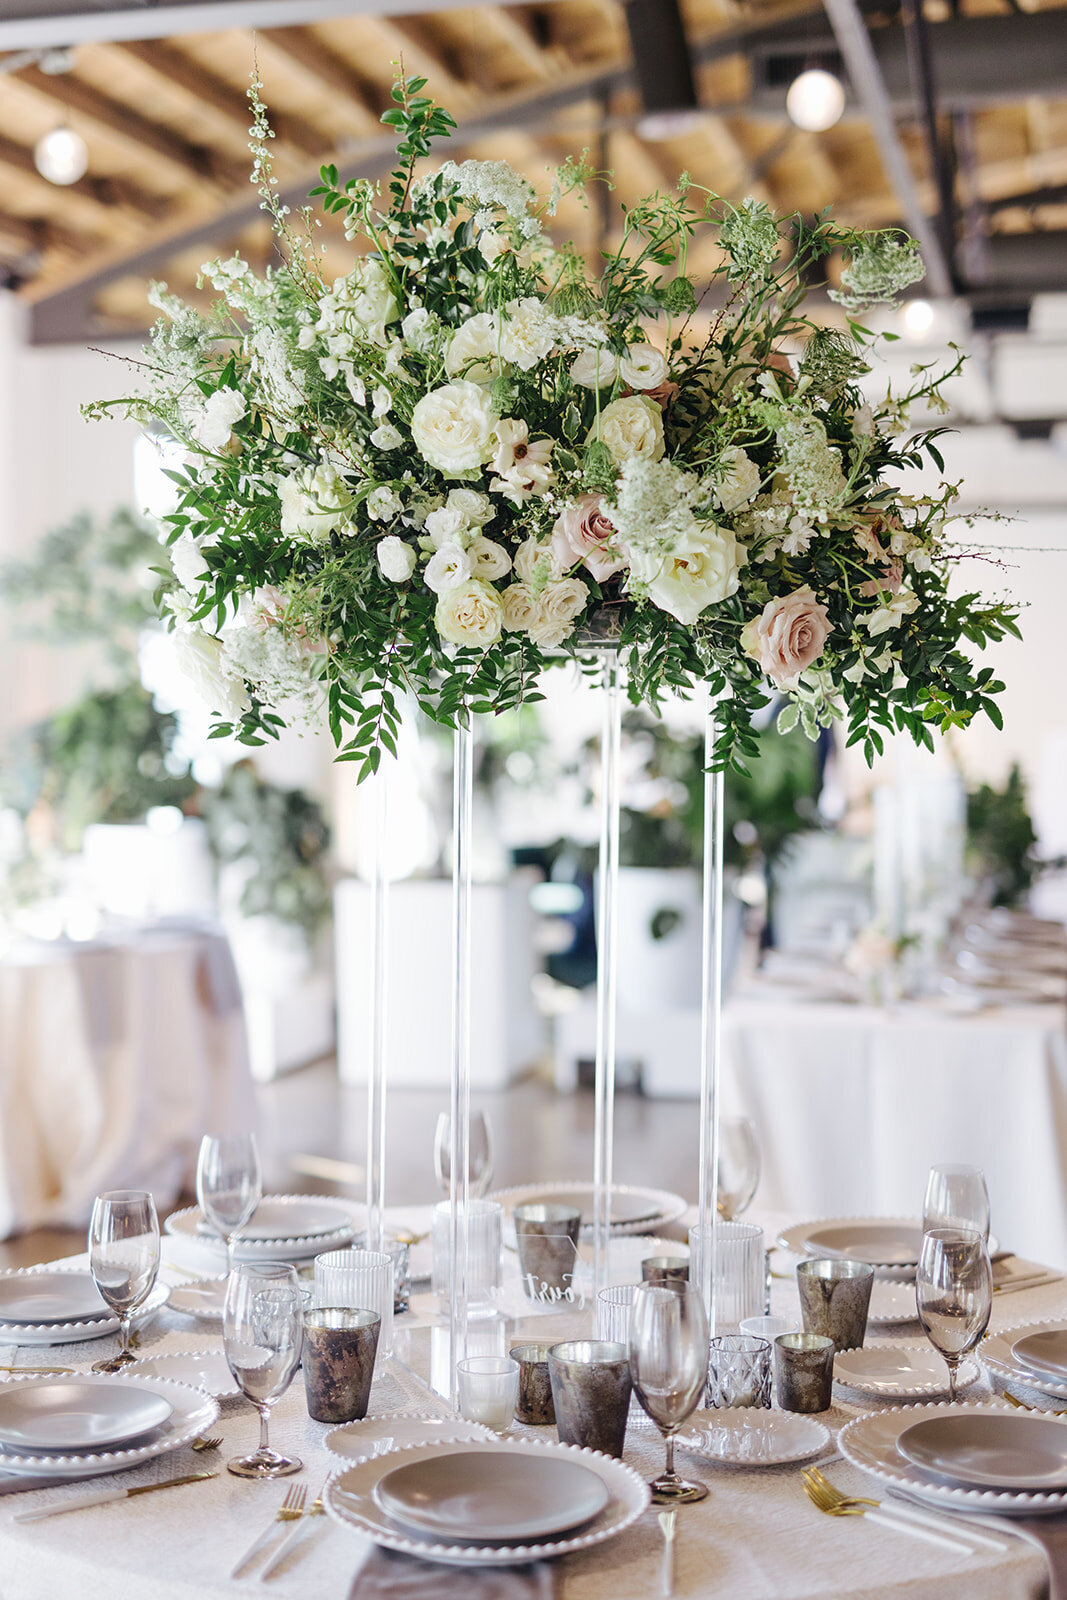 Elevated lucite stands with lush floral centerpieces of white garden roses, ranunculus, delphinium, lisianthus, Queen Anne’s lace and natural, untamed greenery. Floral hues of white, cream, and blush. Designed by Rosemary and Finch in Nashville, TN.